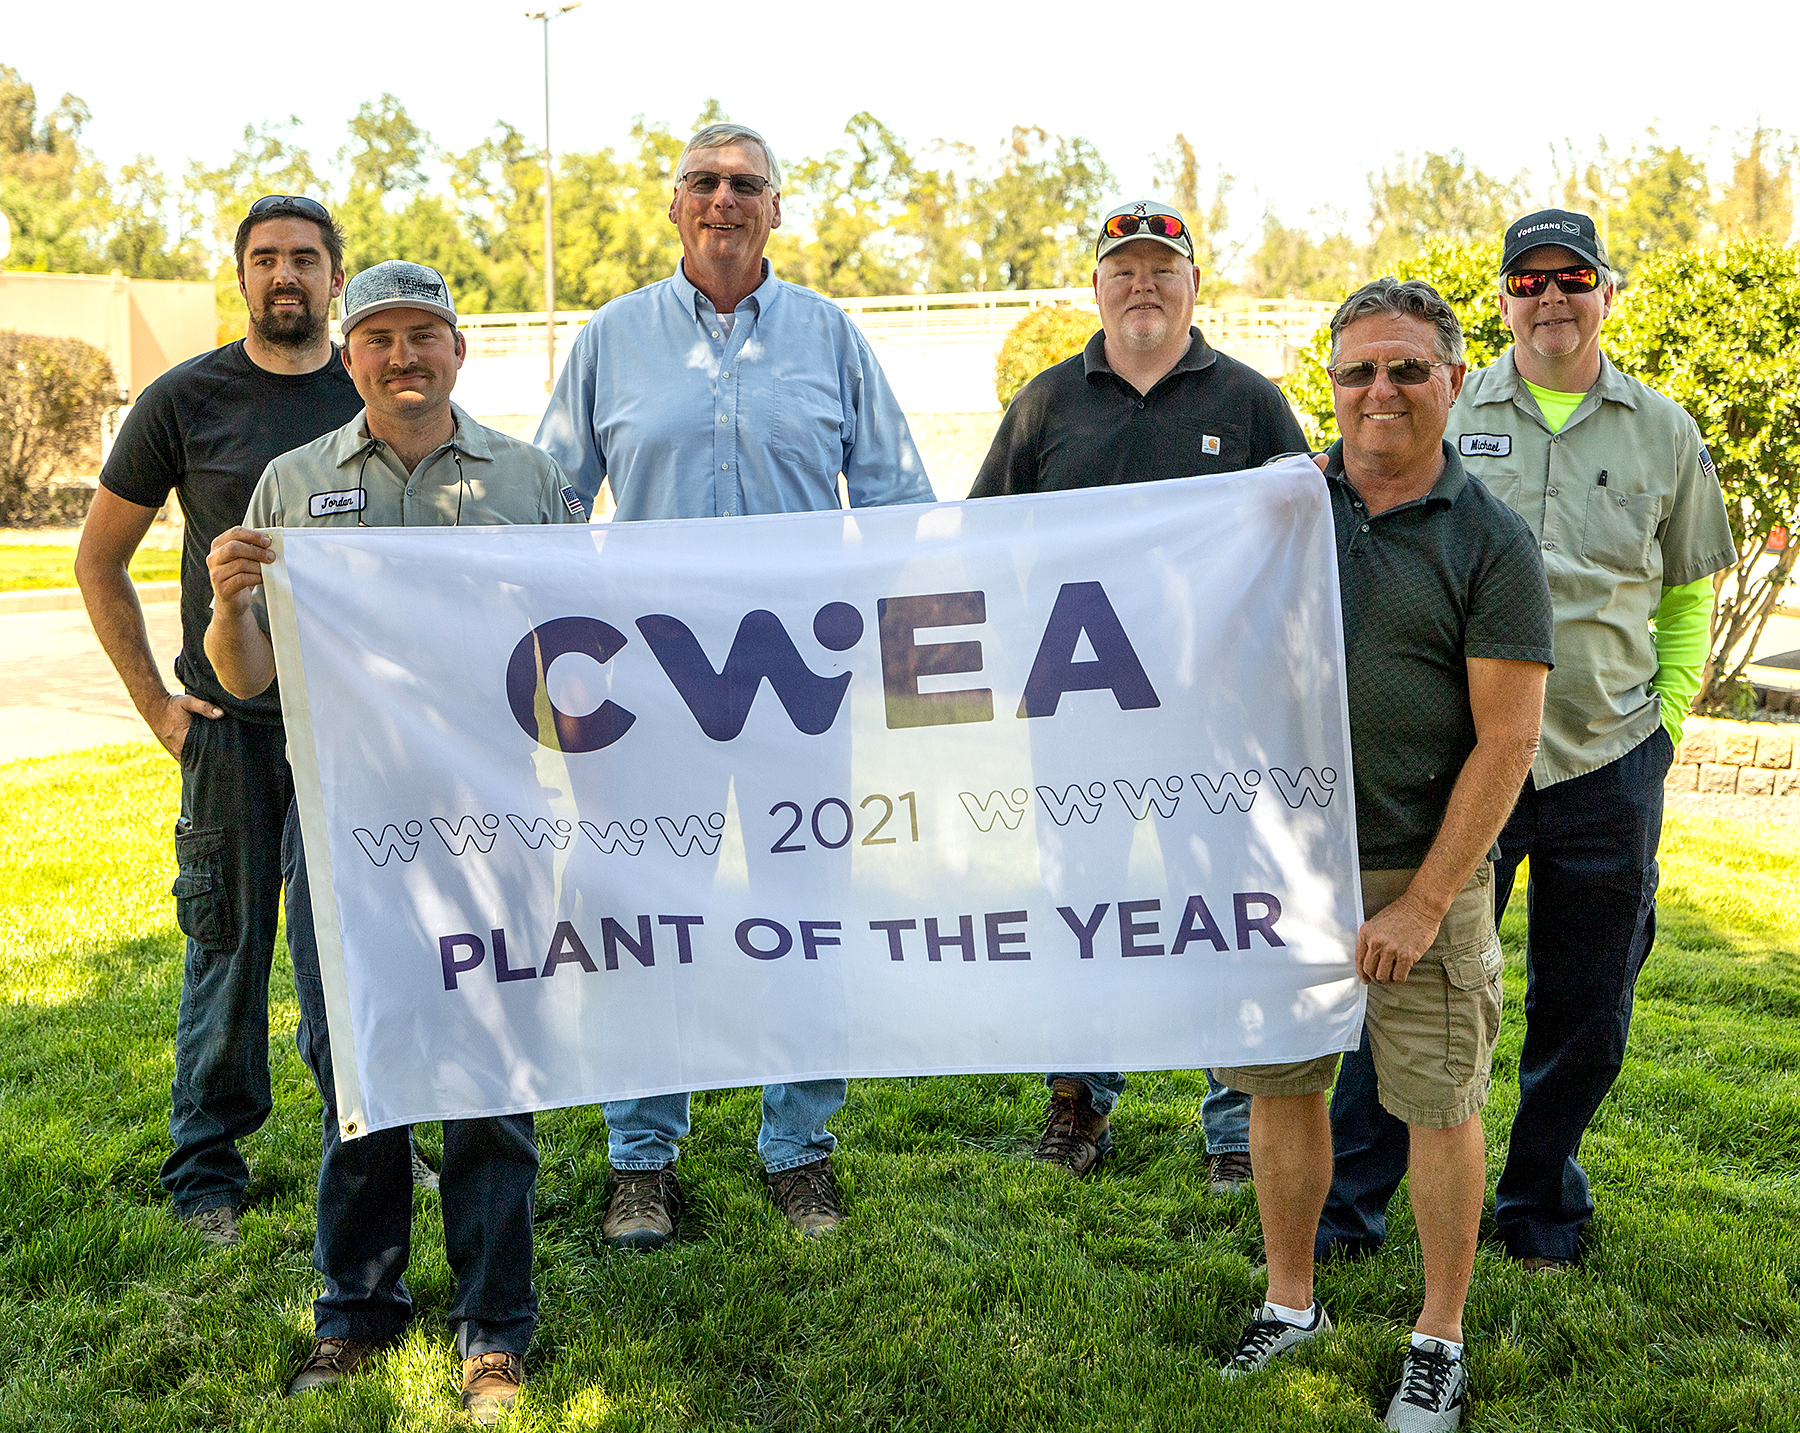 Redding’s Stillwater Treatment Facility Wins Small Plant of the Year